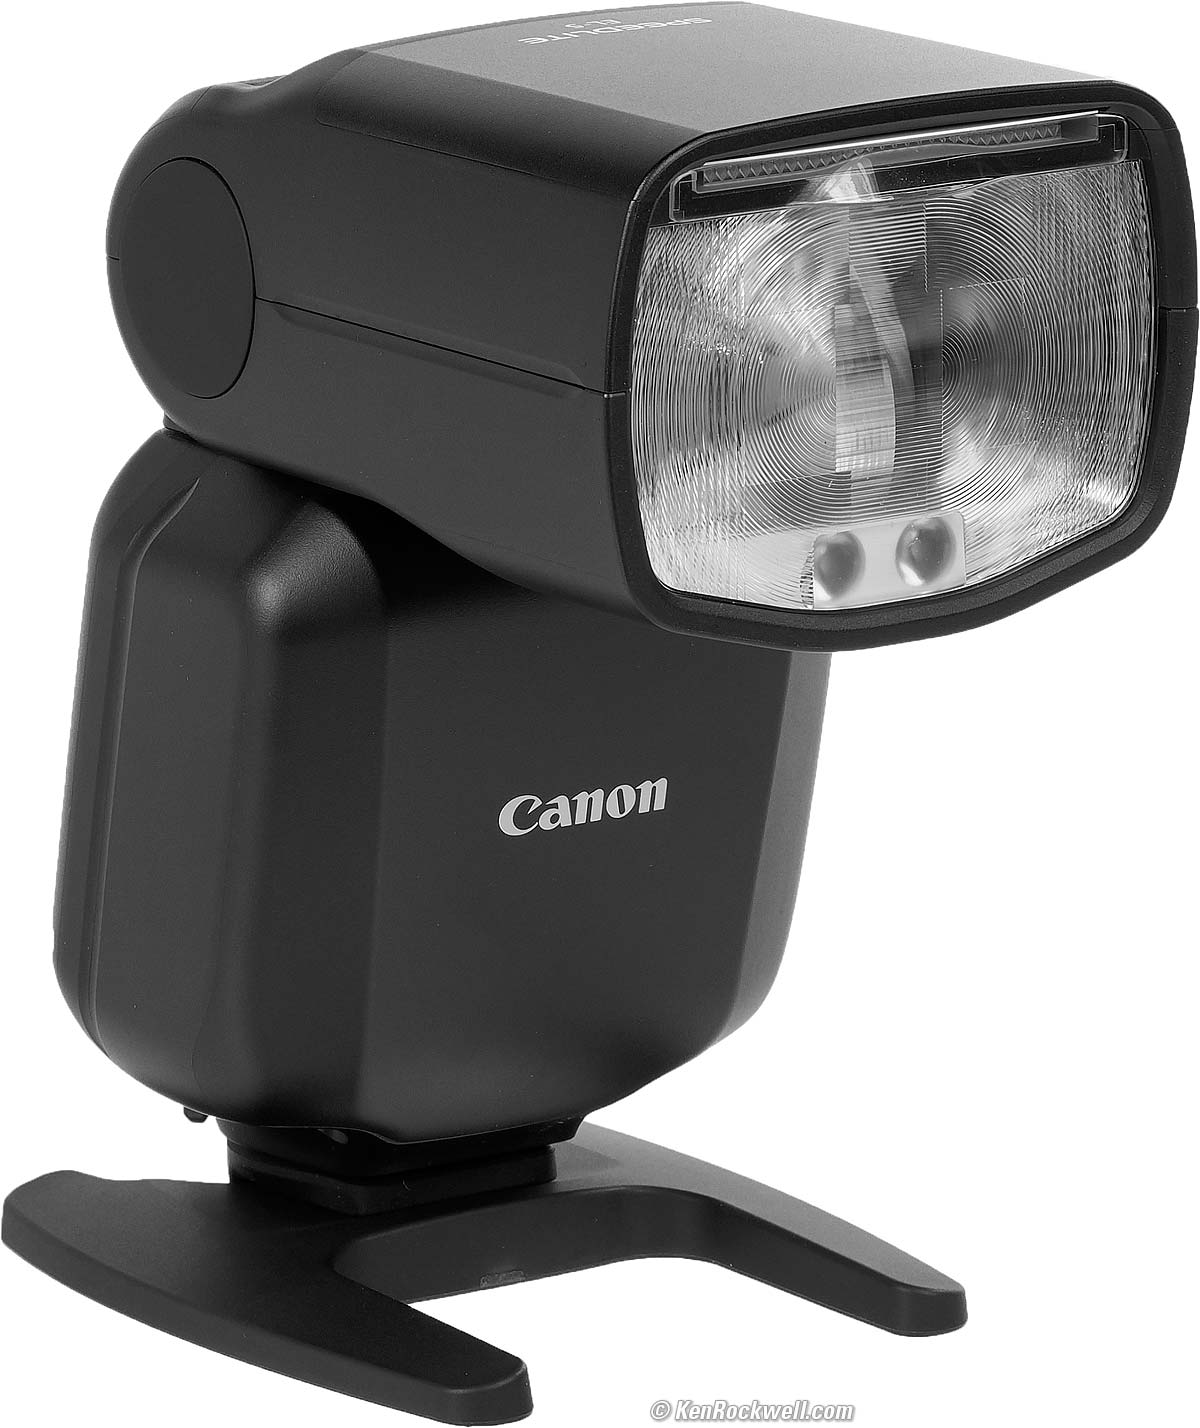 Canon Speedlite 430EX III-RT Flash Review: Rock Solid Build Quality and  Excellent Performance